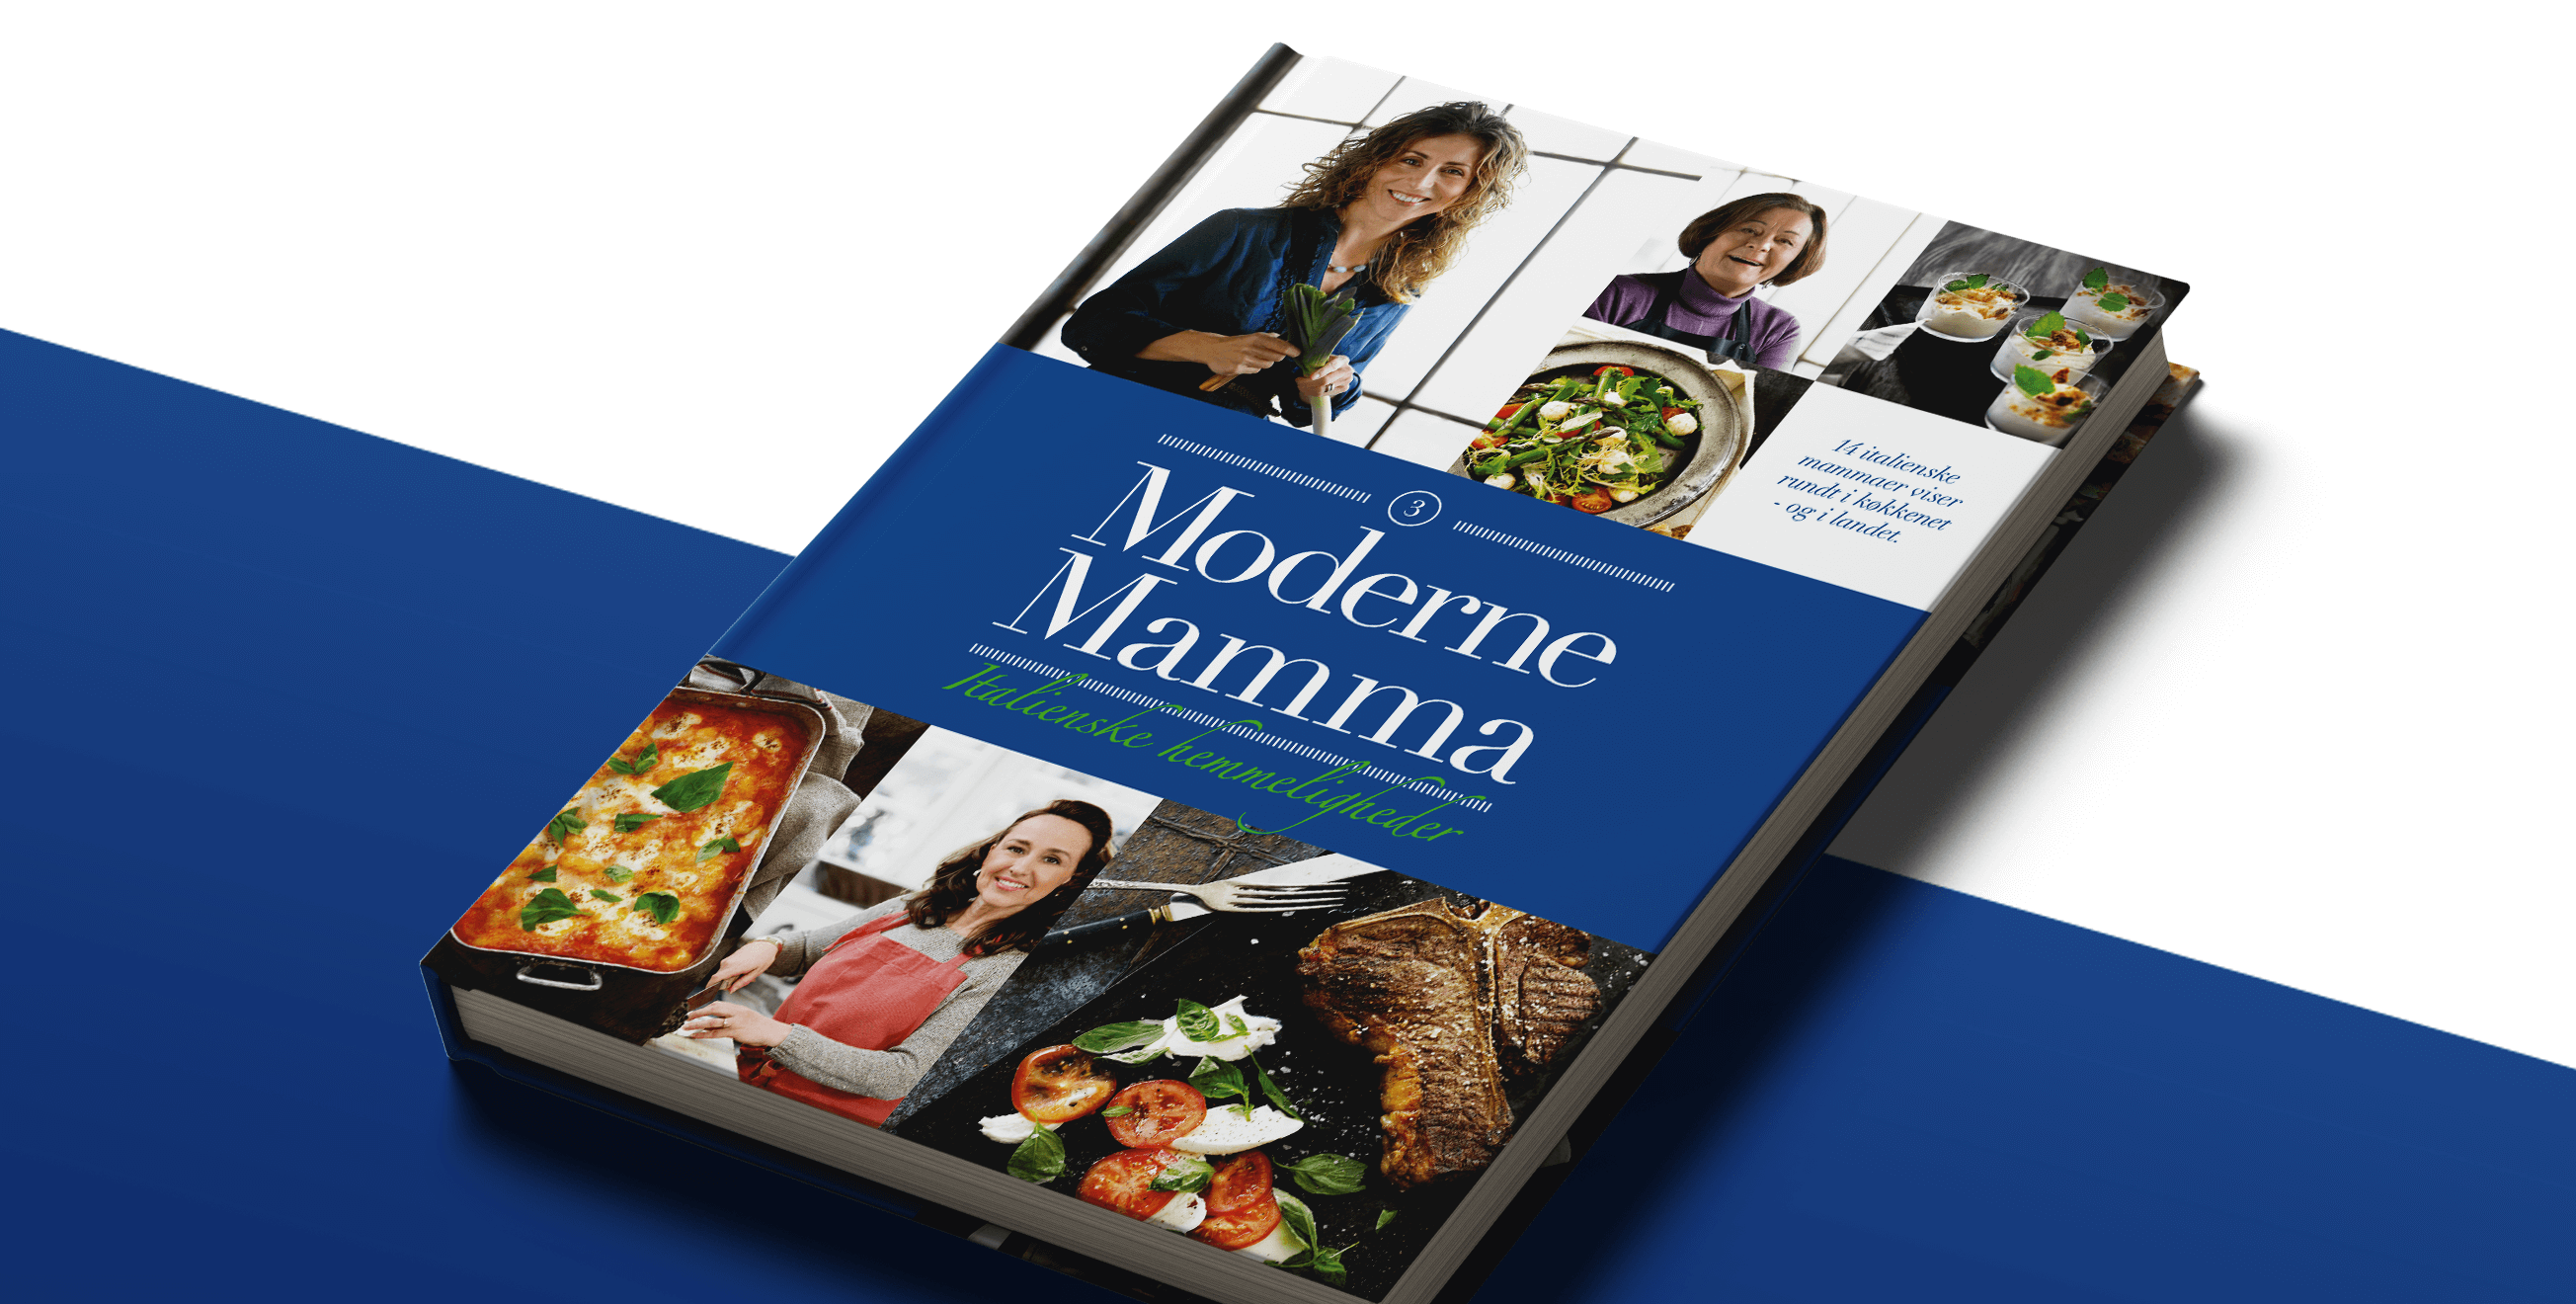 Moderne Mamma — Art direction and editorial book design.